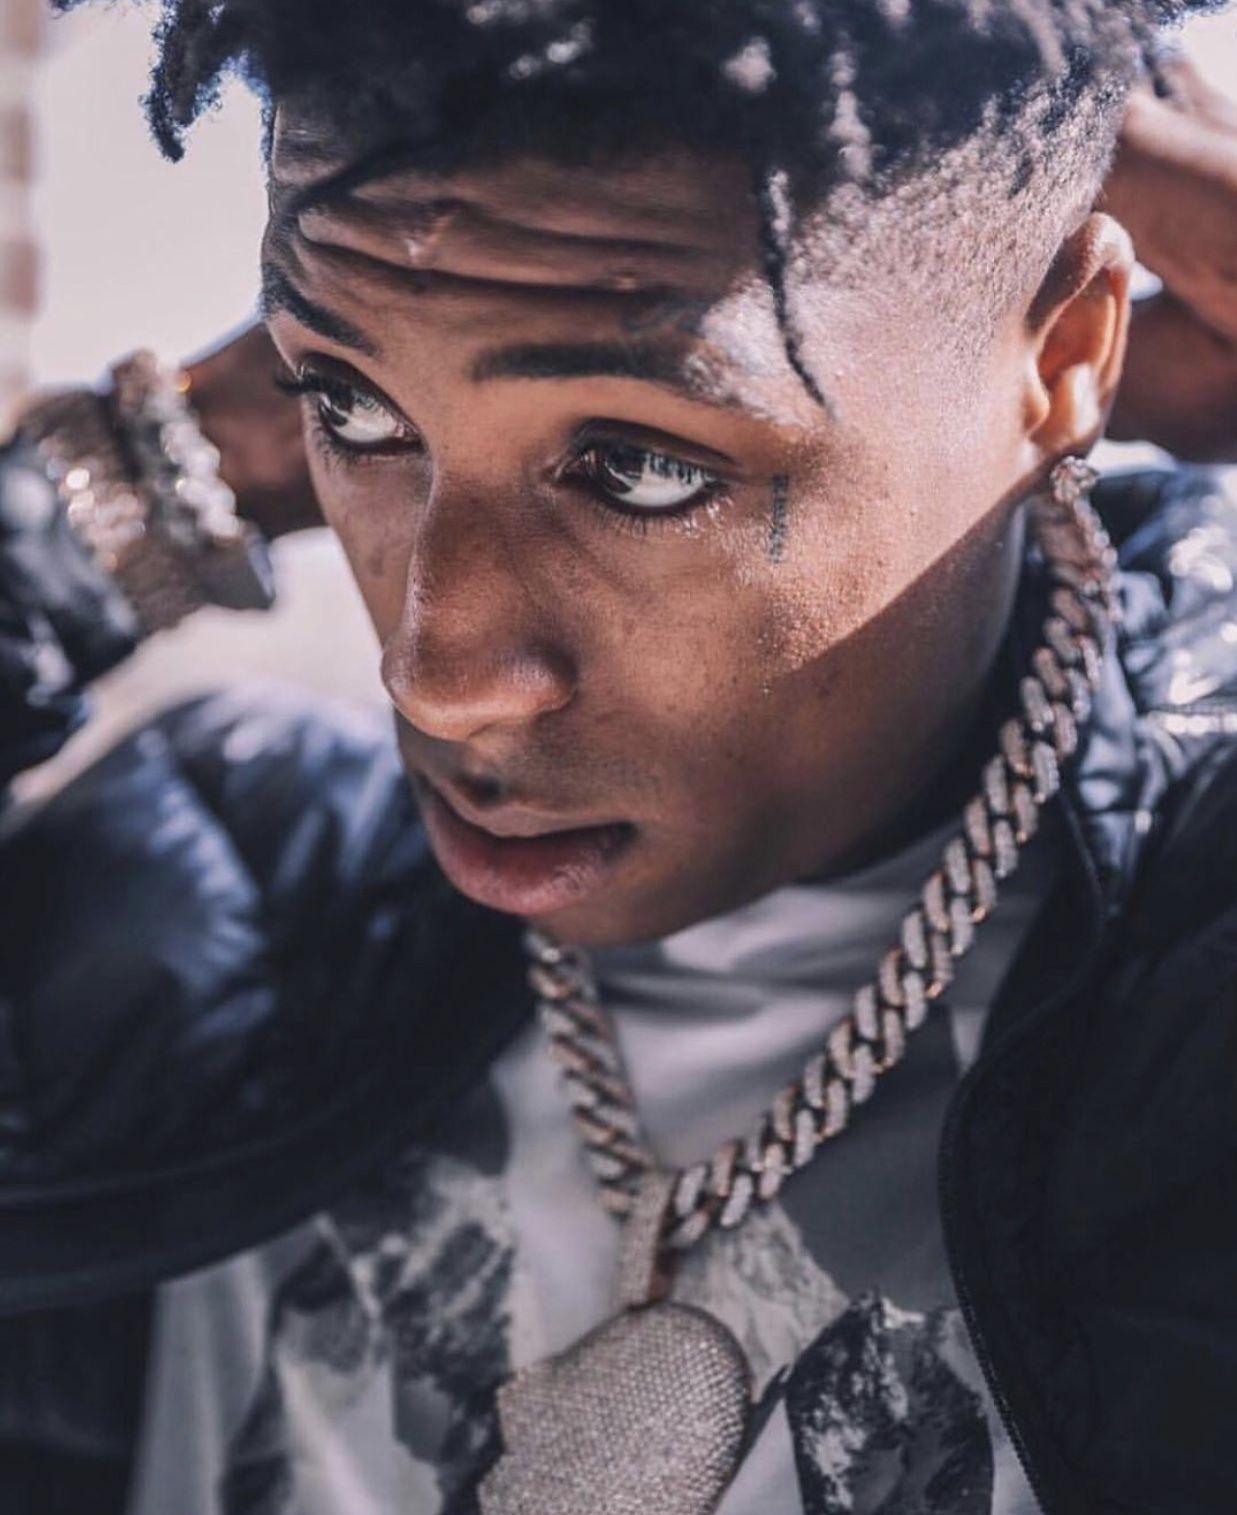 nbayoungboy in 2019